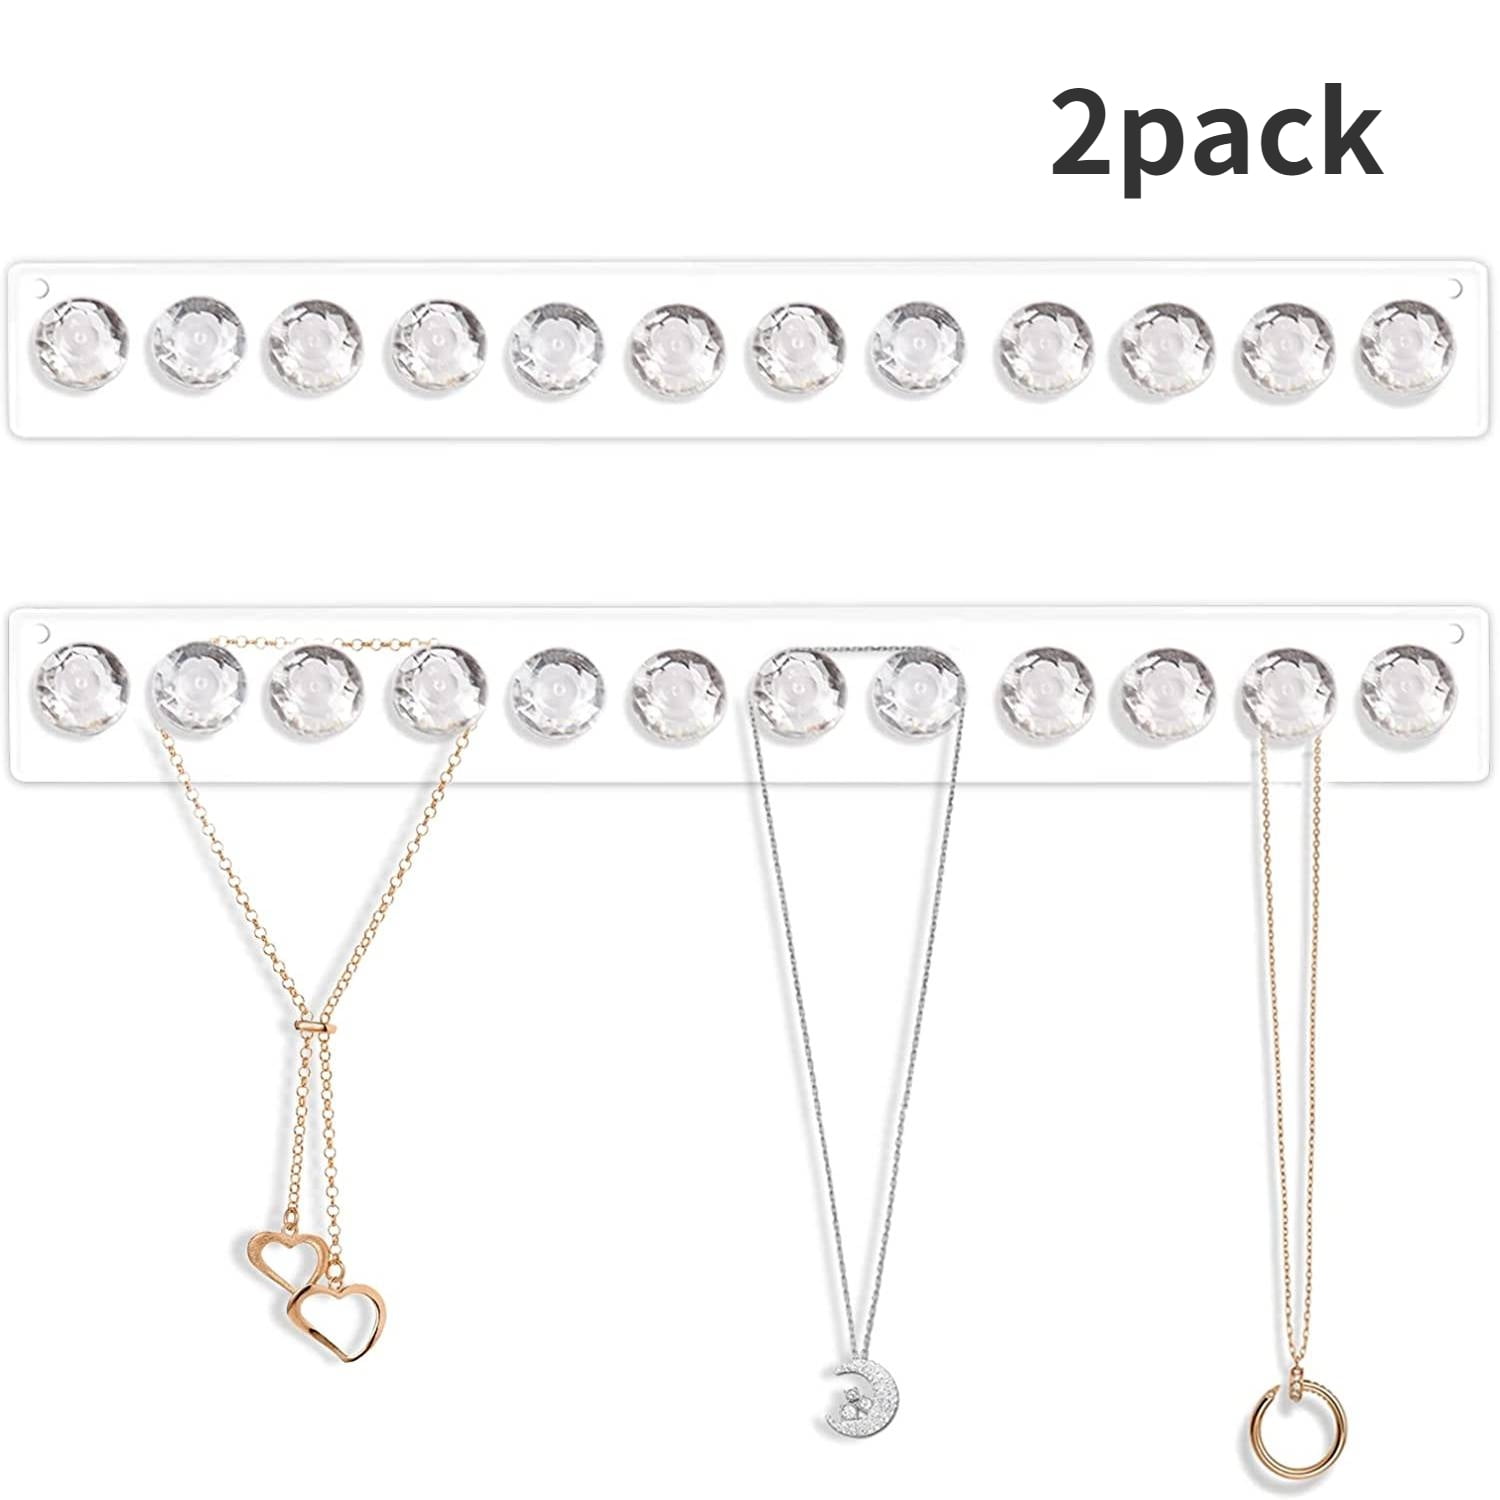 1pcs Acrylic Necklace Hanger, Necklace Holder, Wall Mount, Hanging